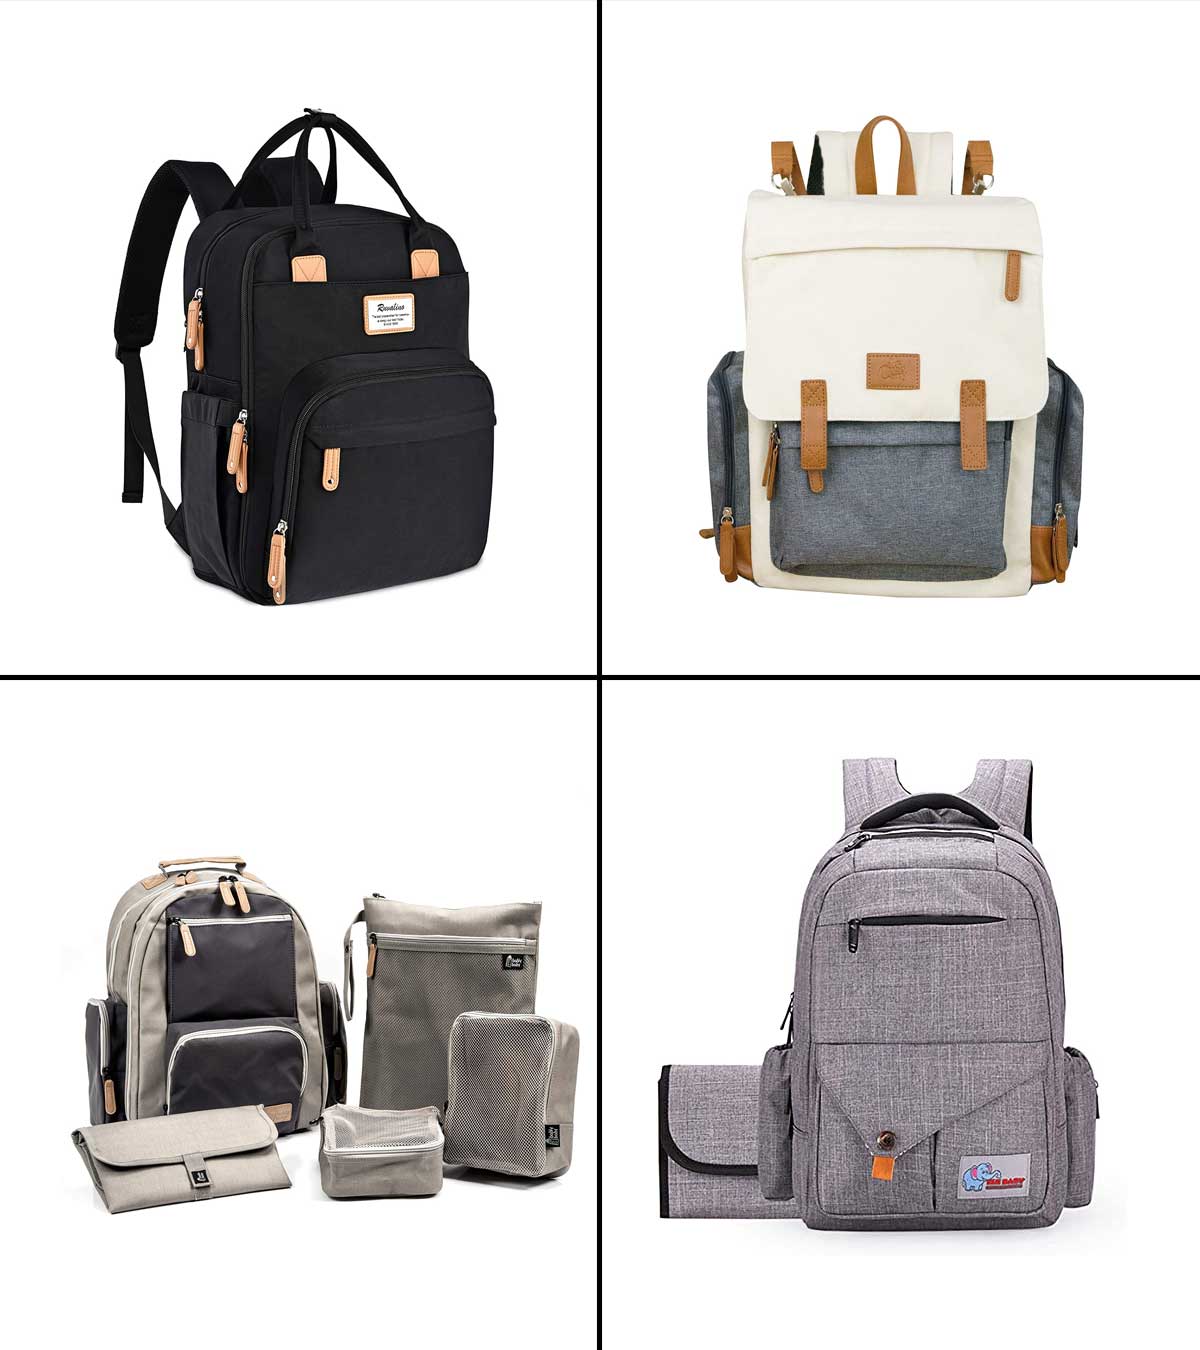 13 Best Backpack Diaper Bags For Twins: Reviews For 2023